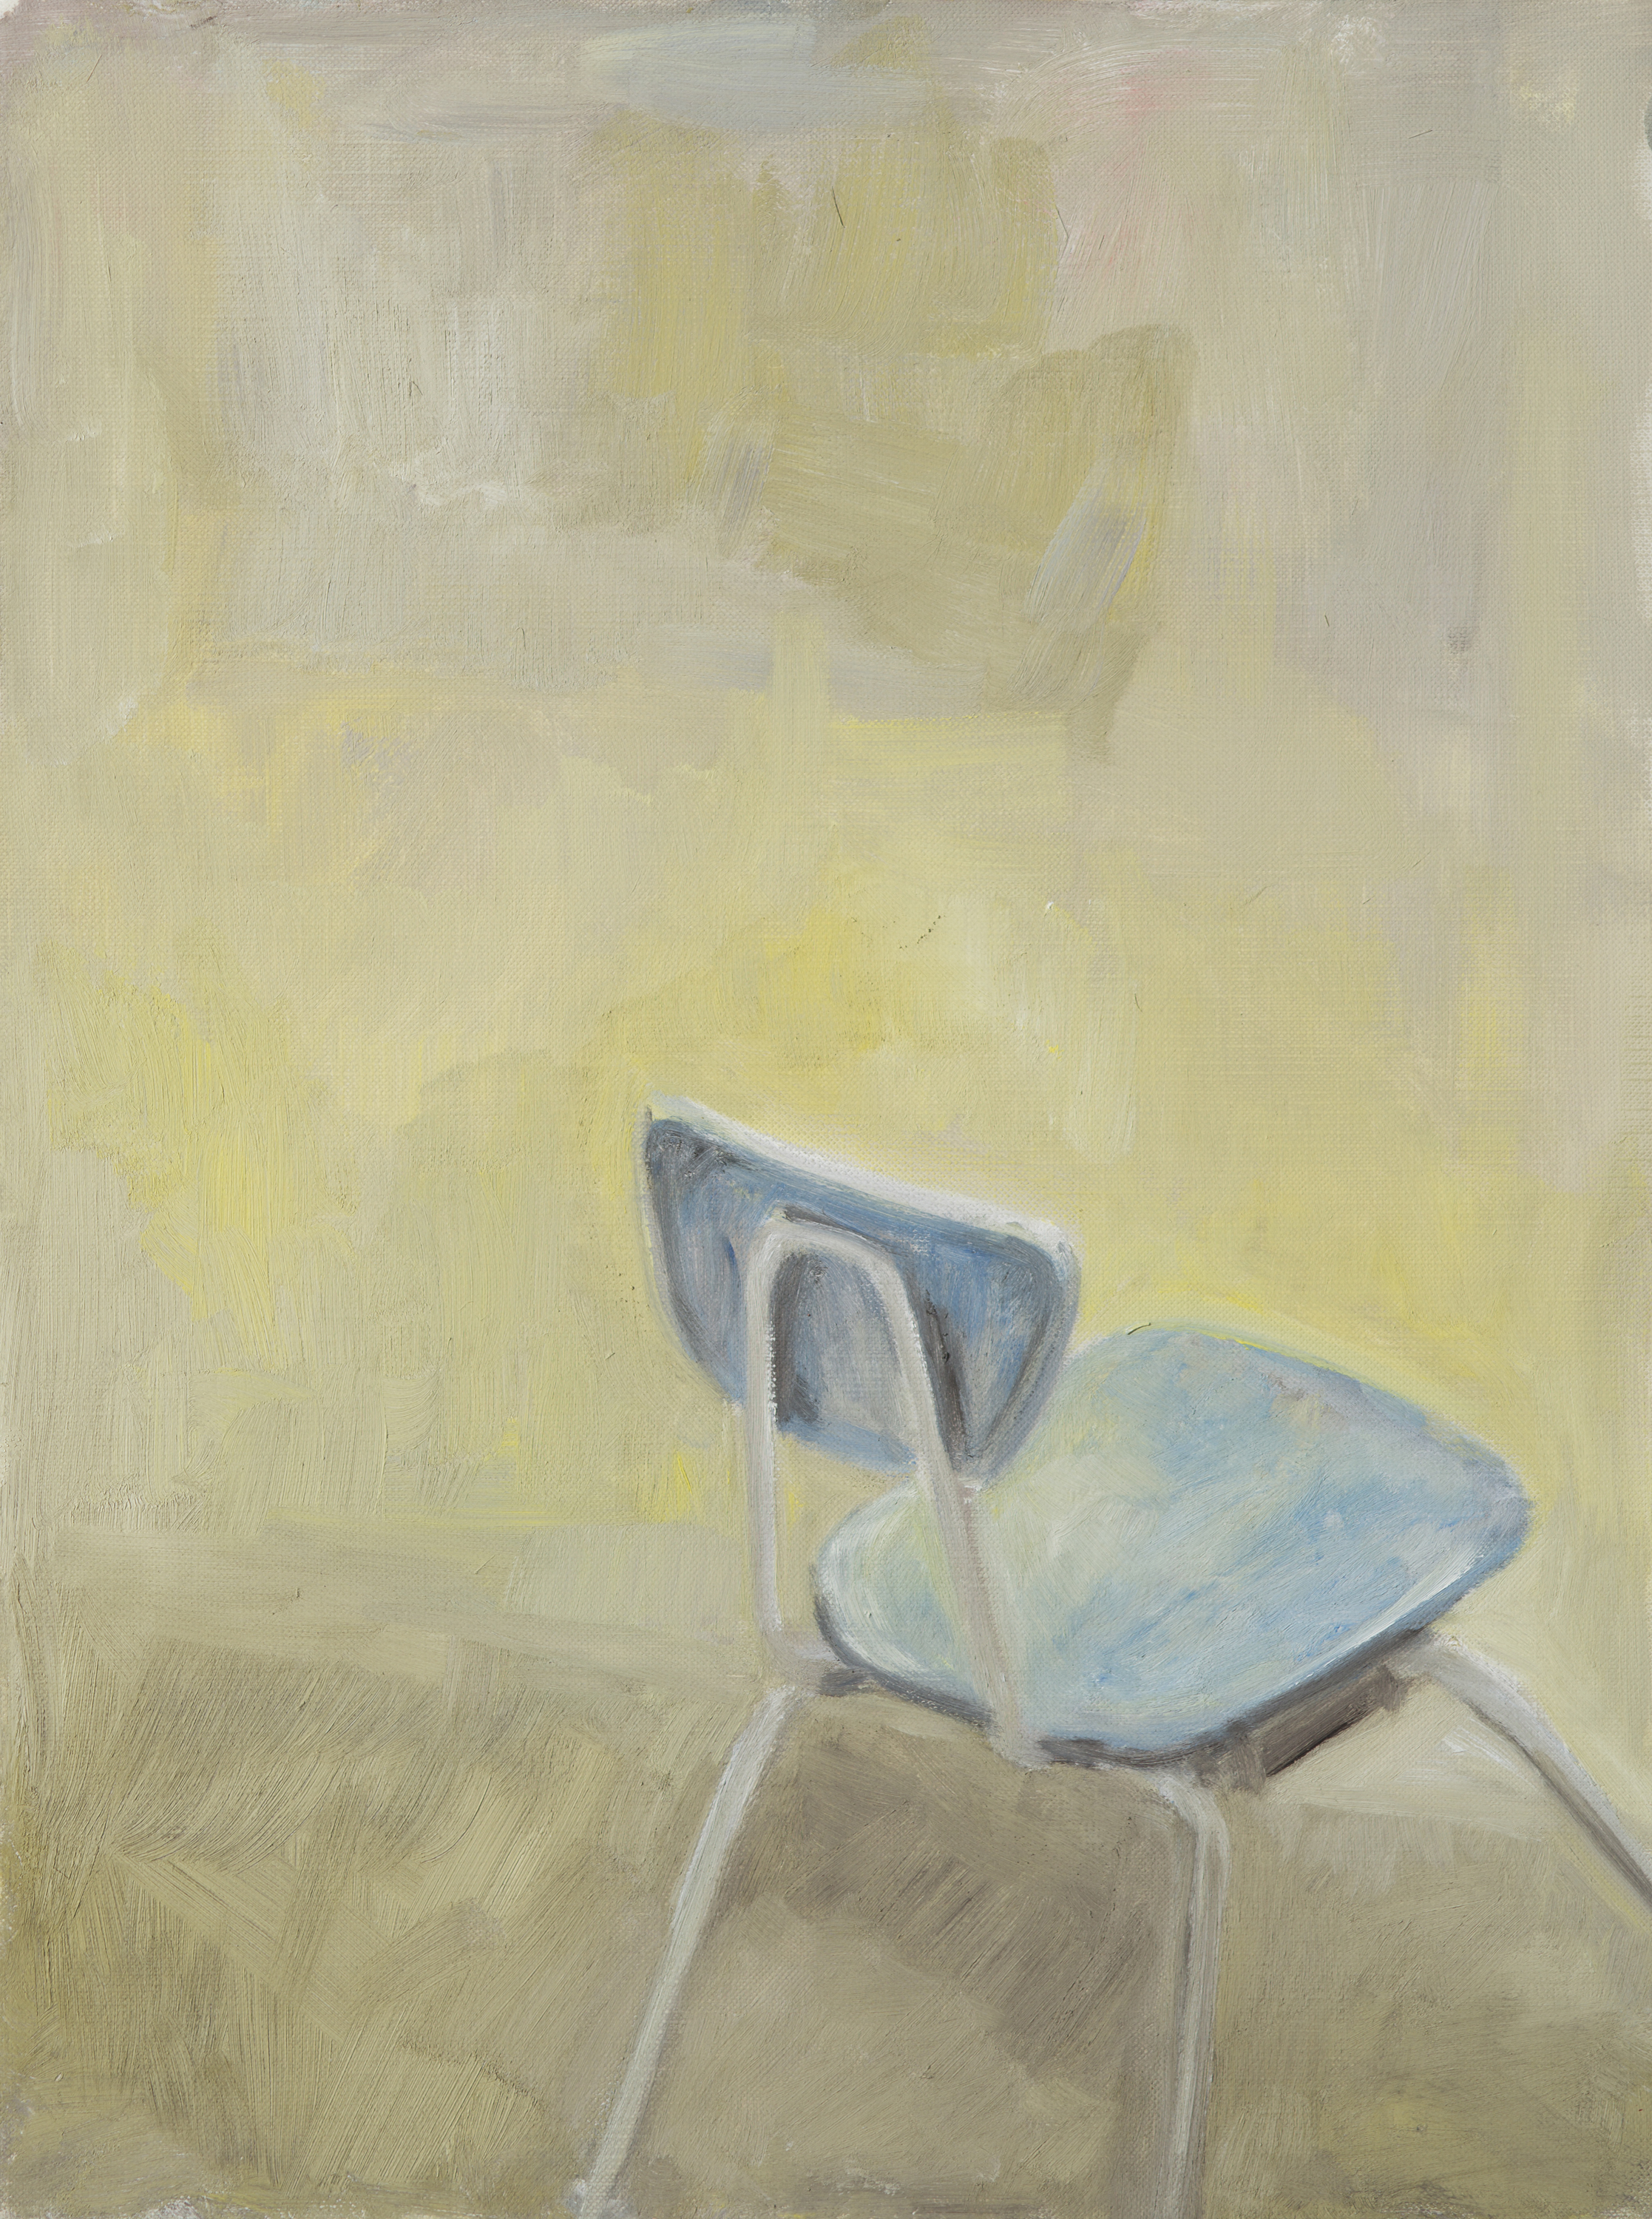 "Have a seat (#1)" oil on paper, 14" x 11"